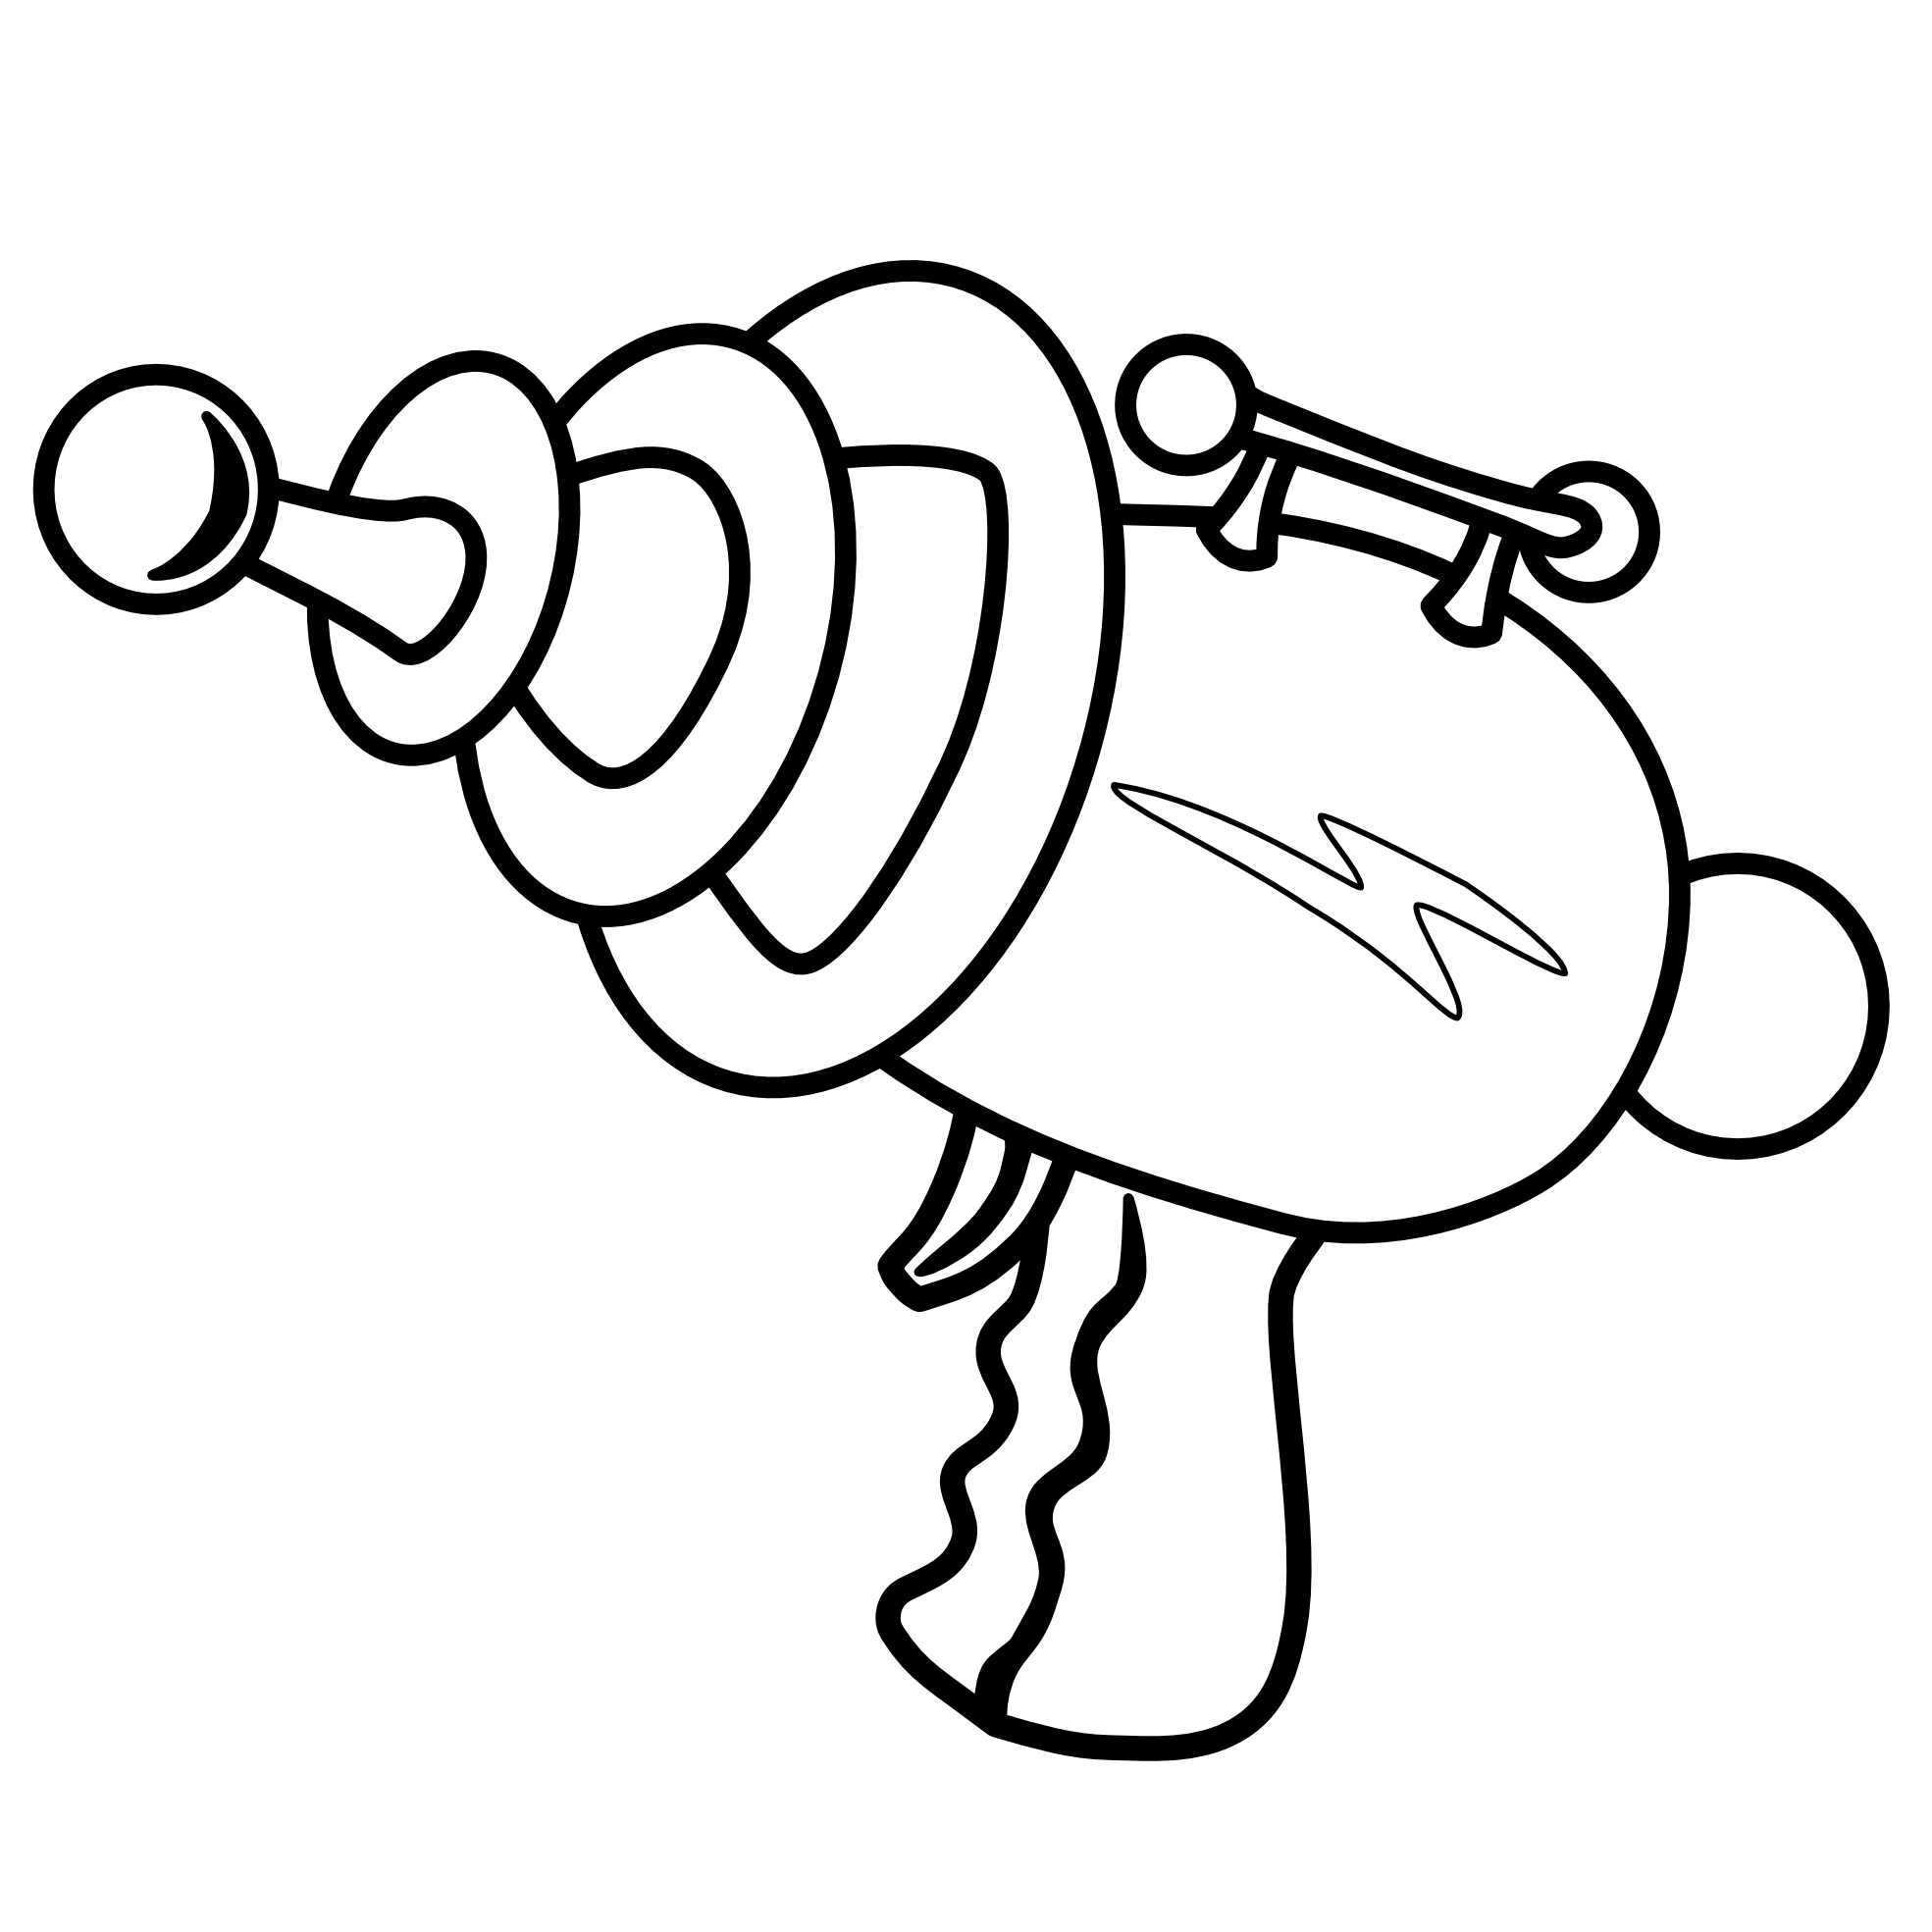 Nerf gun clipart with no background